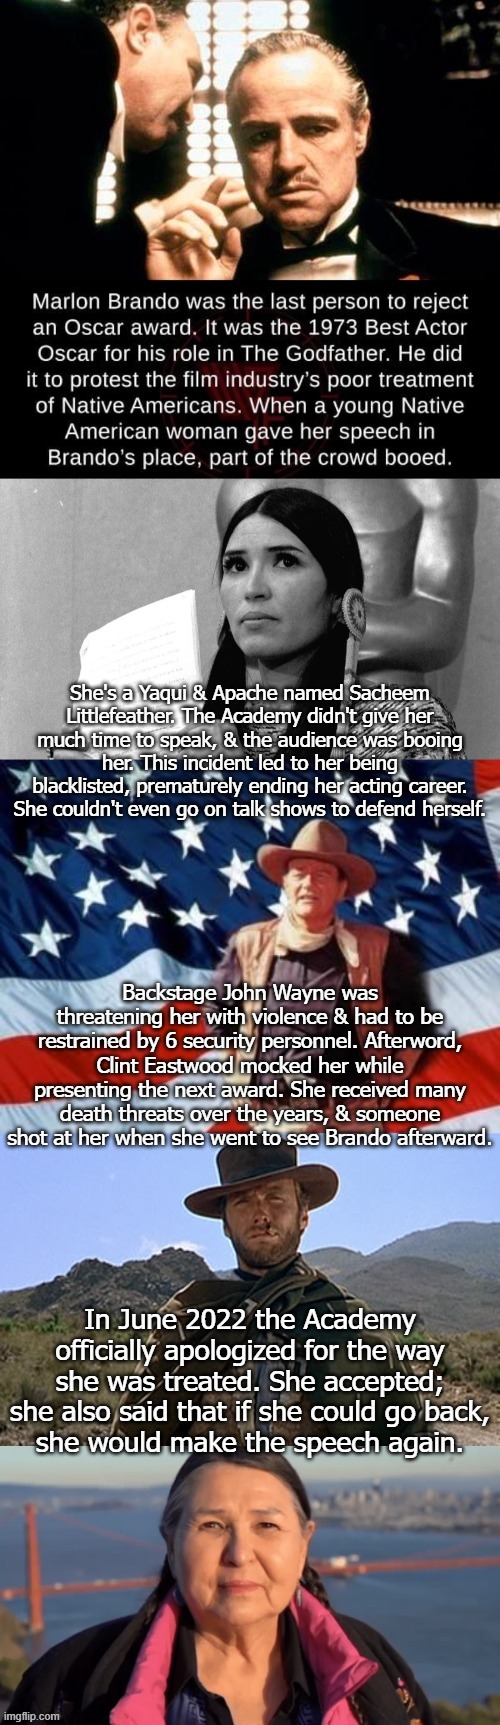 Unlike Will Smith, John Wayne was not banned from the Oscars. | image tagged in brave,native american,racism,scumbag hollywood | made w/ Imgflip meme maker